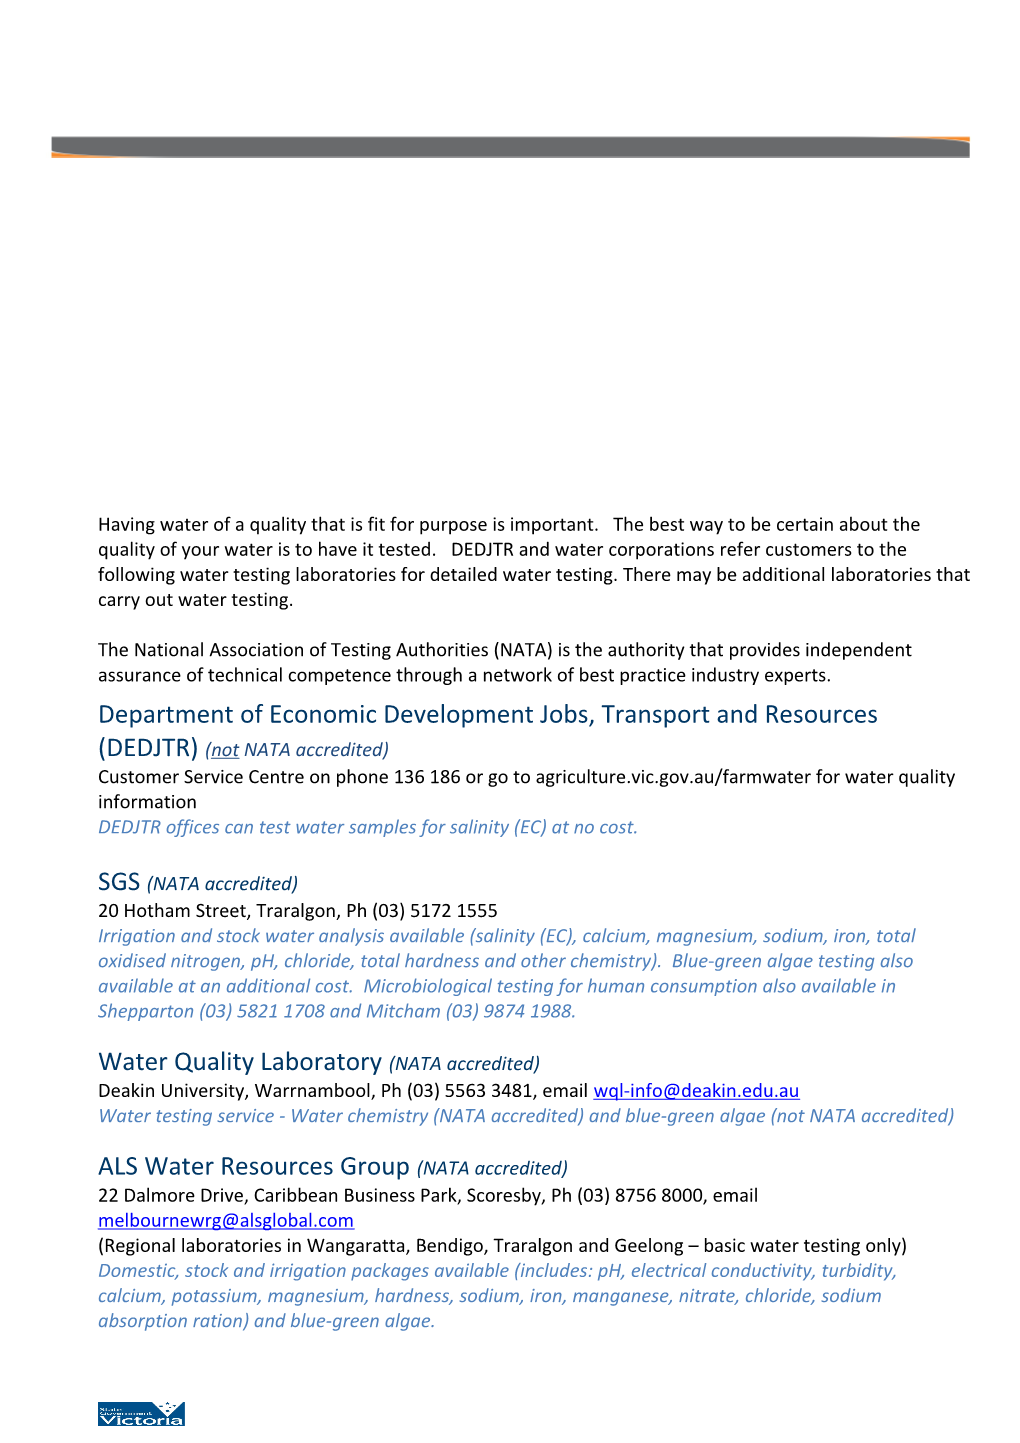 Department of Economic Development Jobs, Transport and Resources (DEDJTR)(Not NATA Accredited)